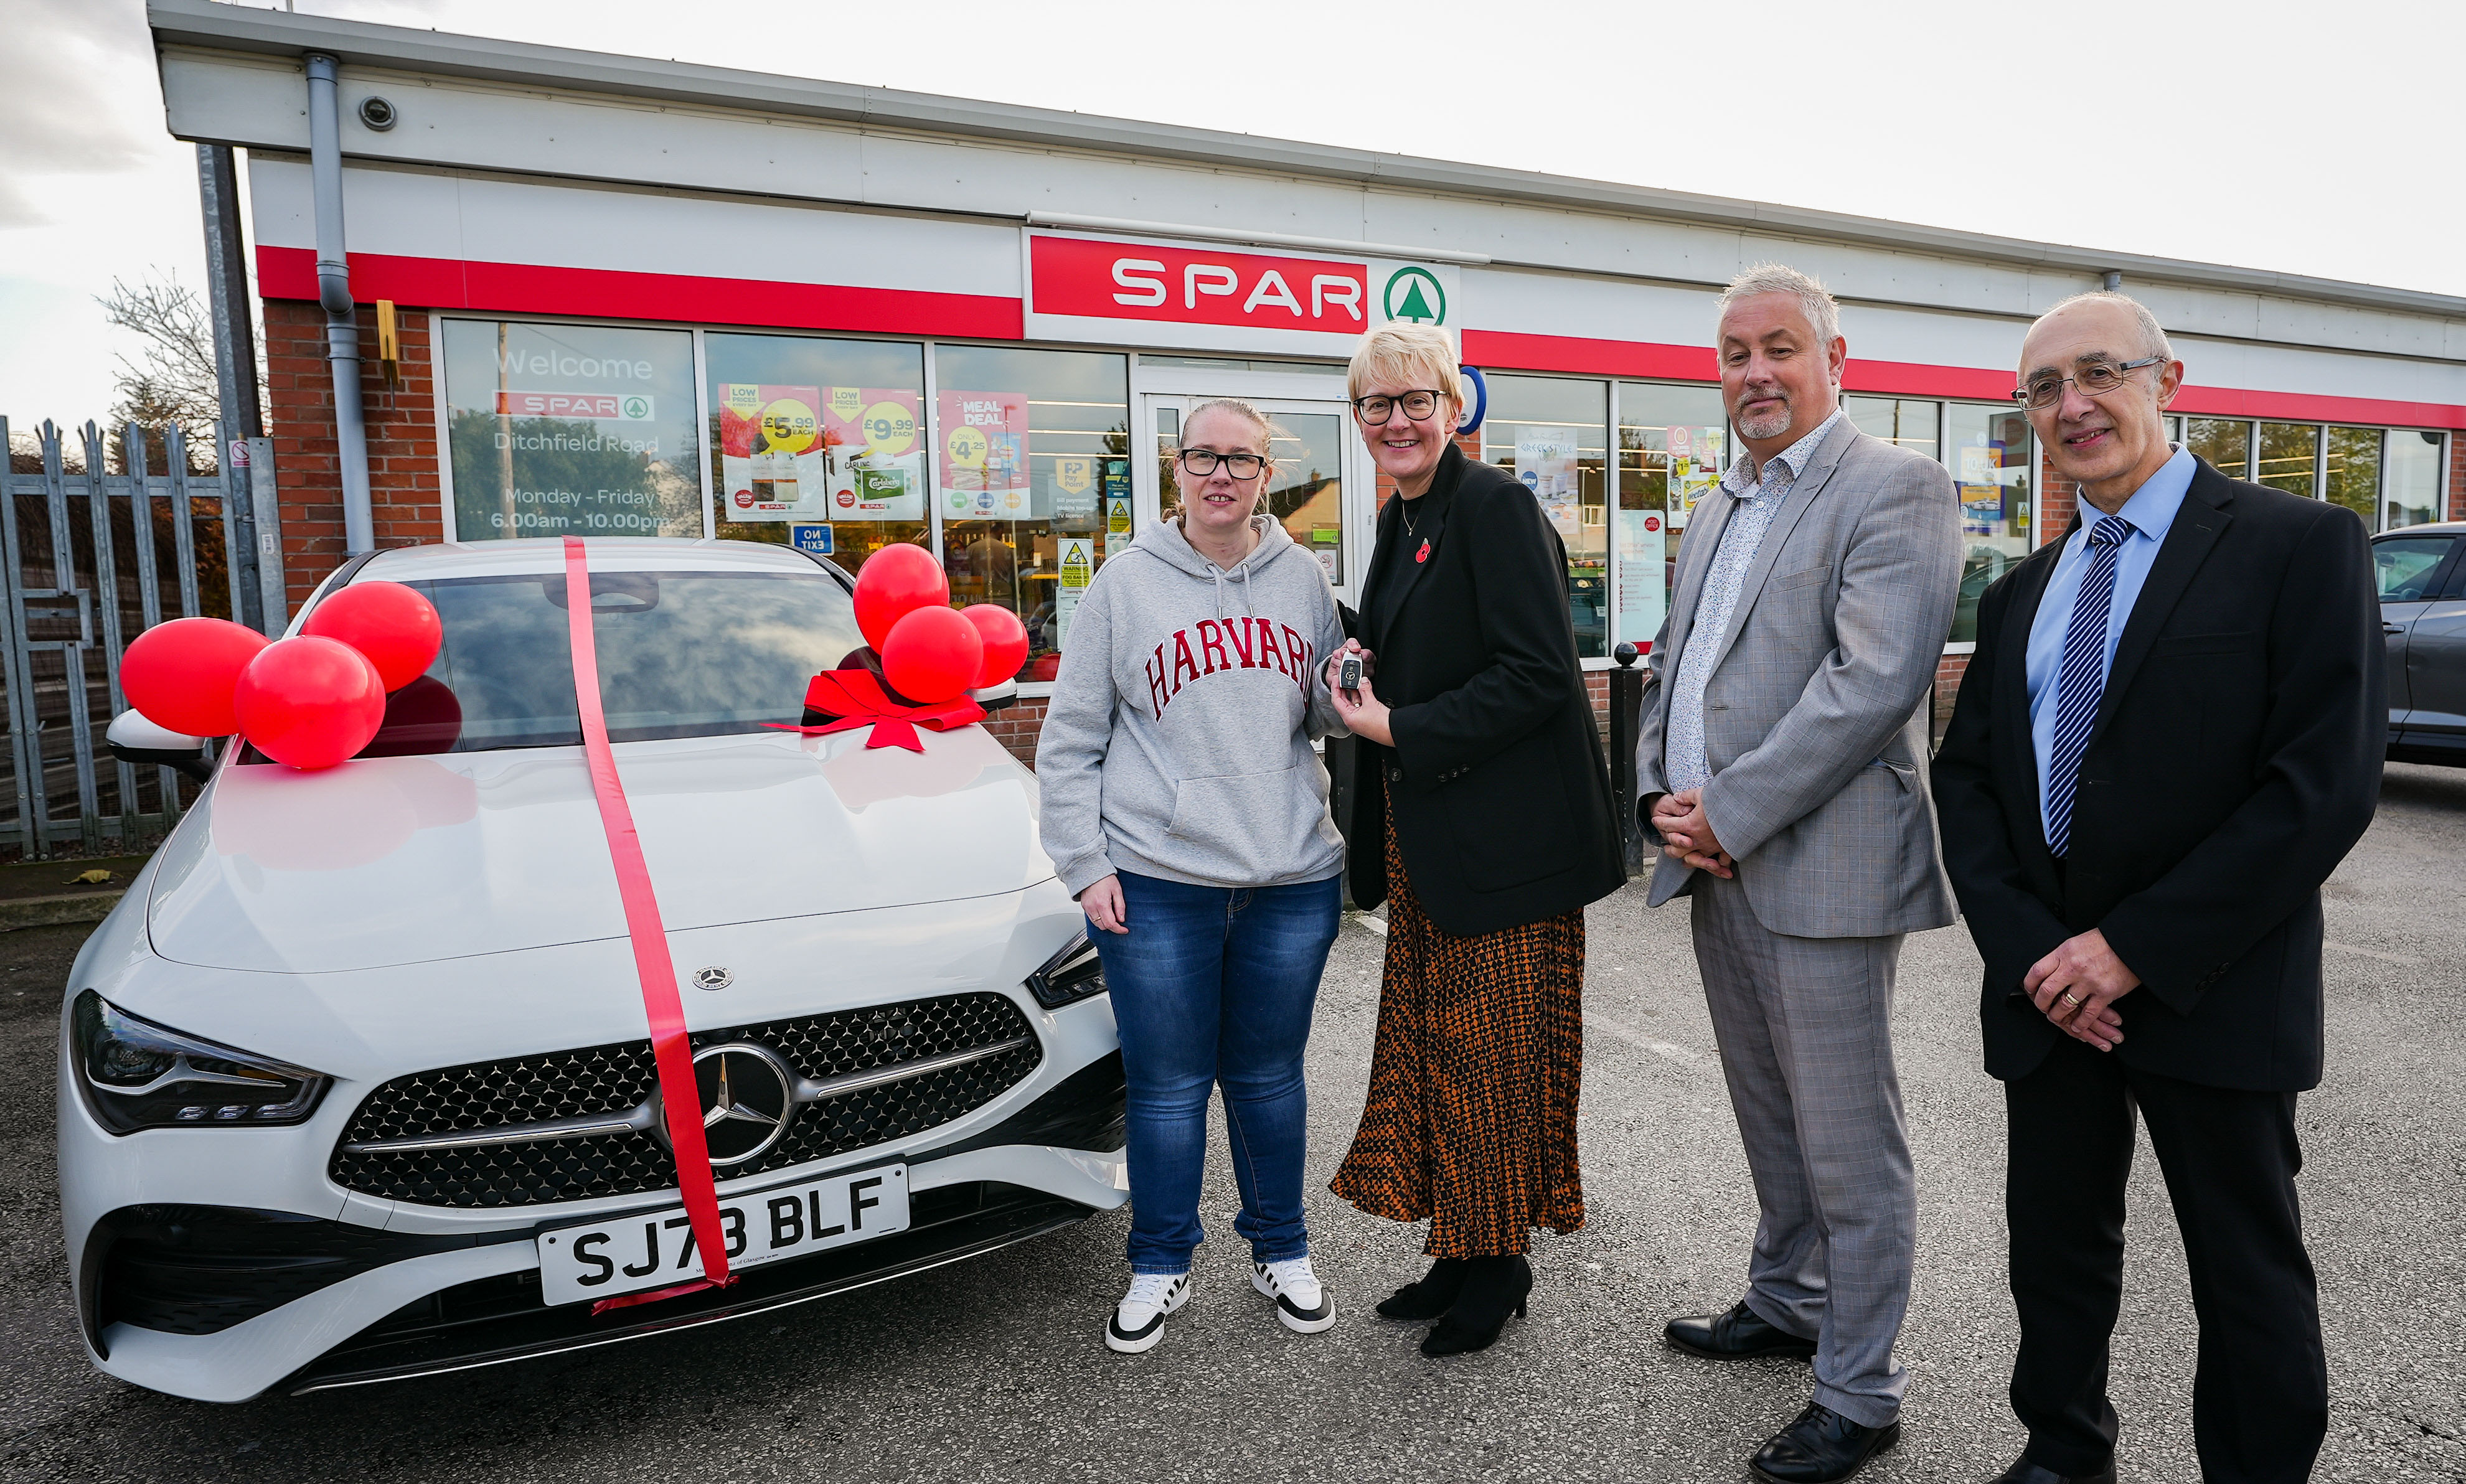 Widnes woman wins Mercedes worth £50,000 courtesy of SPAR and MrBeast